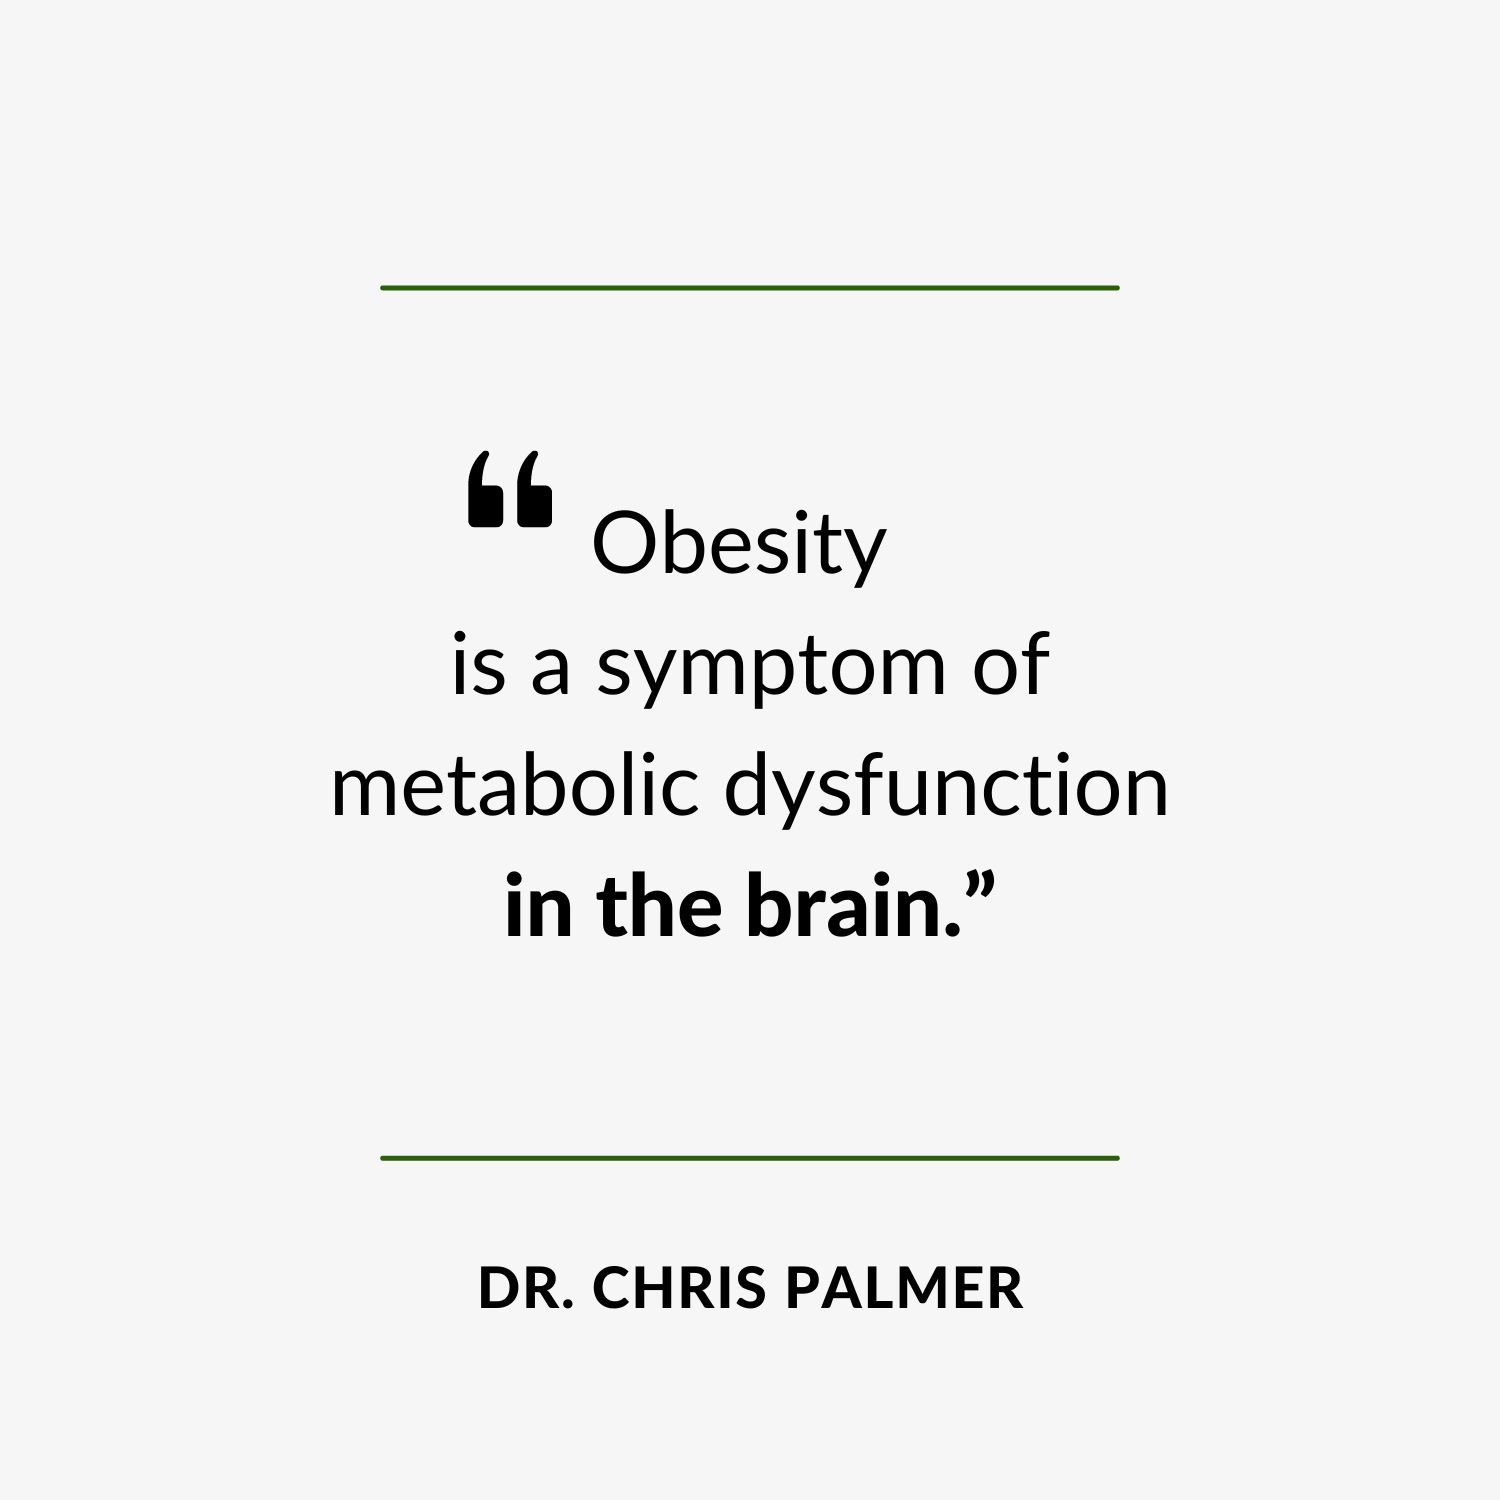 Episode Quote - “Obesity is a symptom of metabolic dysfunction in the brain.”